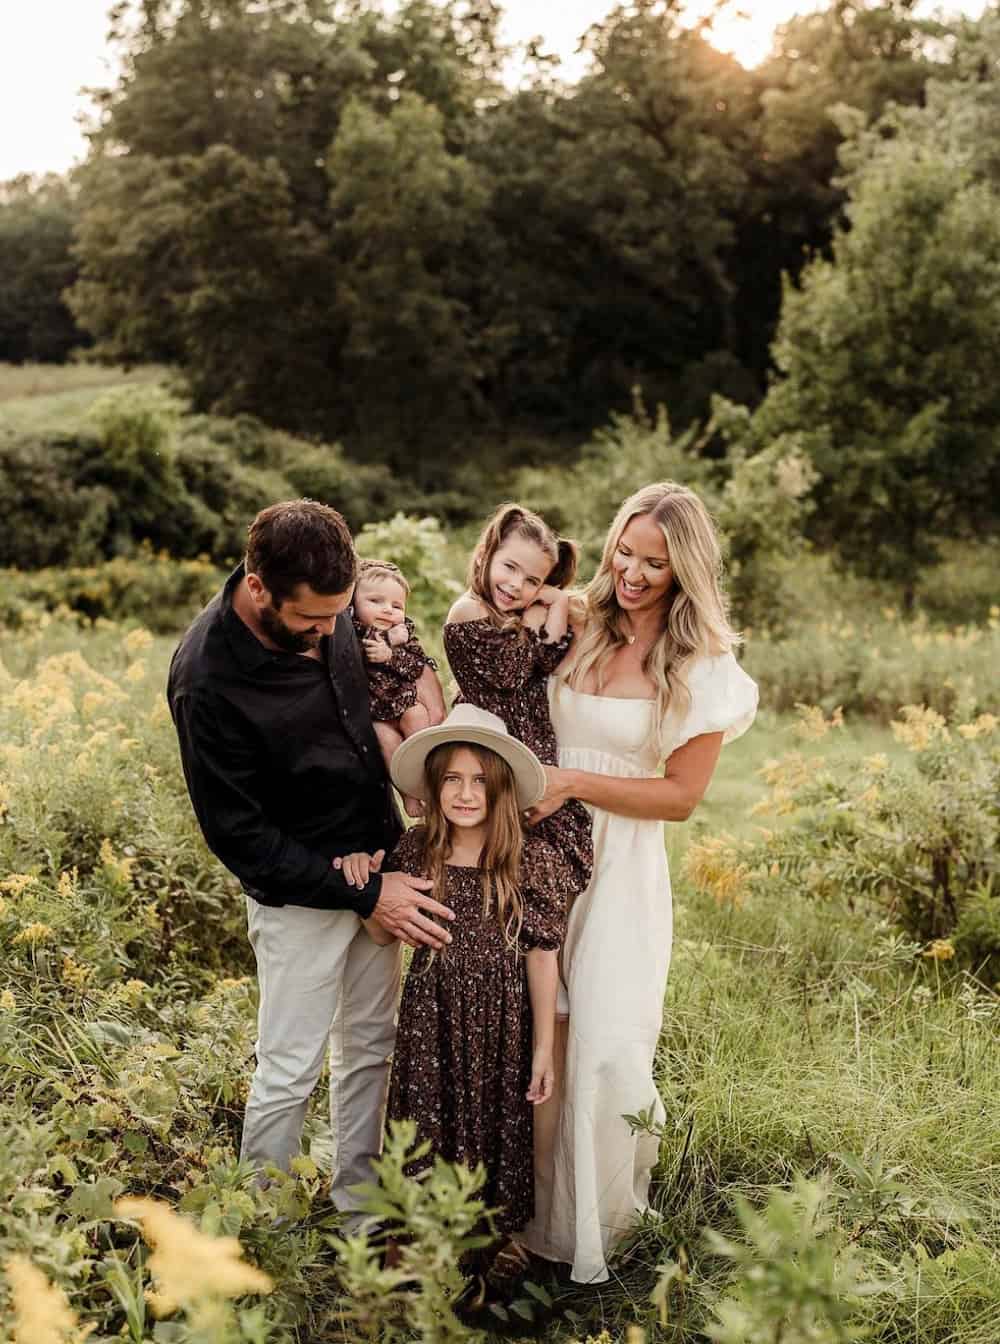 family photoshoot in the fall with the people wearing neutral colors and neutral floral dresses